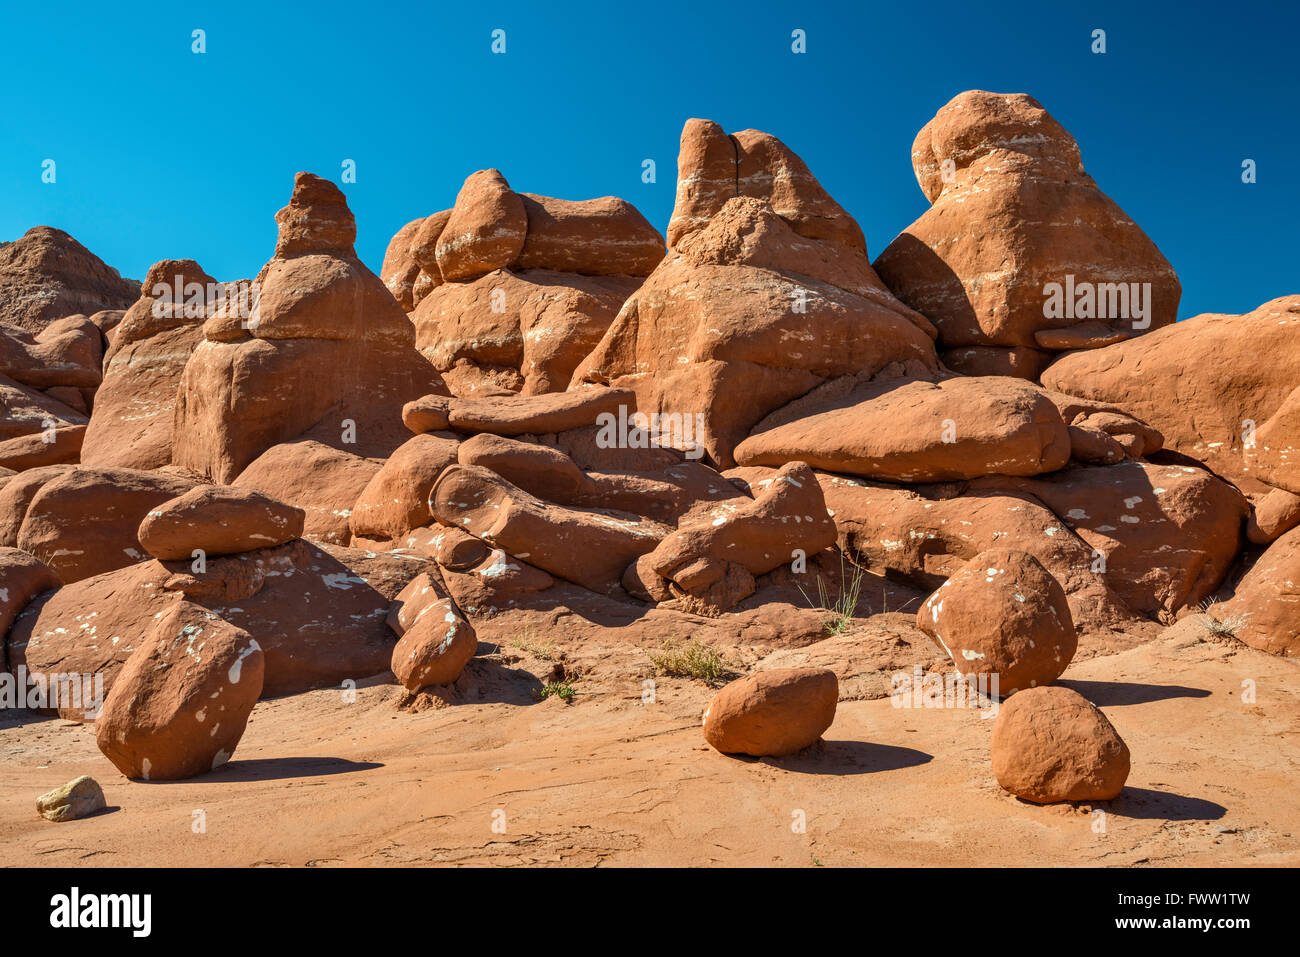 Sandstone goblins and hoodoos at Little Egypt Geological Site, Bicentennial Highway area, south of Hanksville, Utah, USA Stock Photo